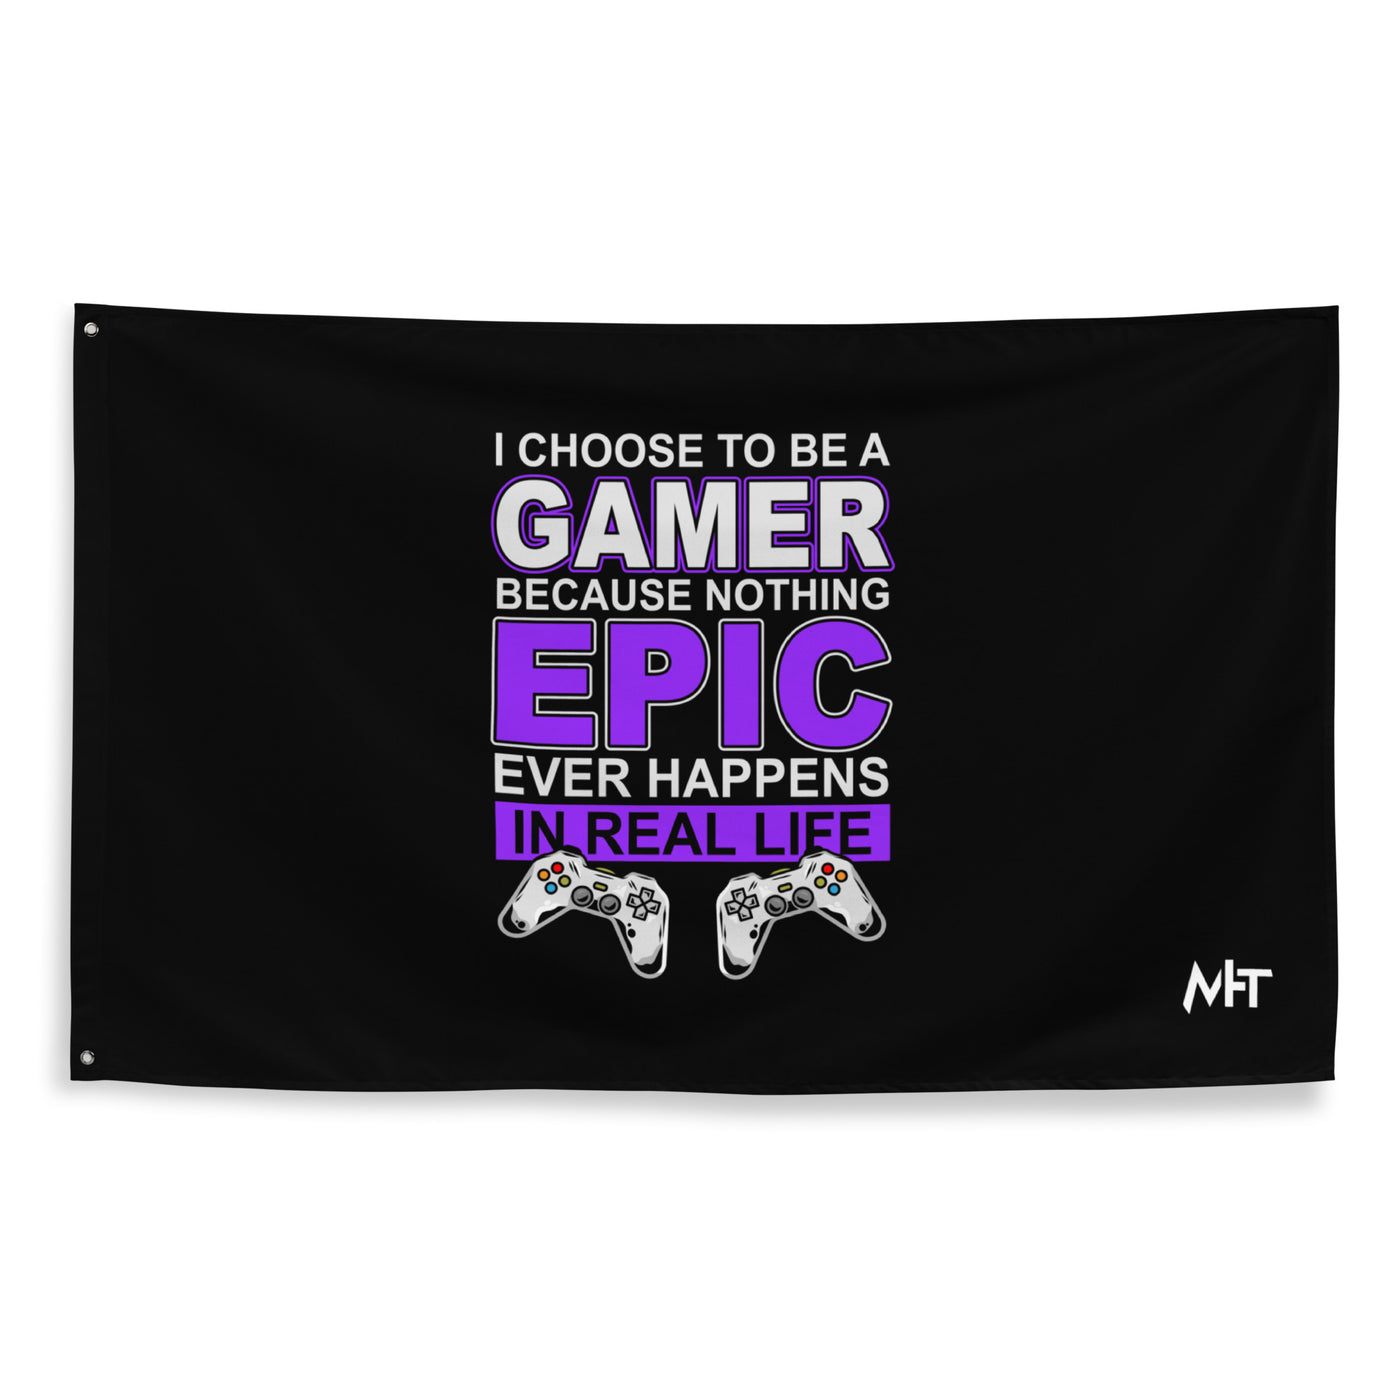 Gamer Epic in Real Life - Flag